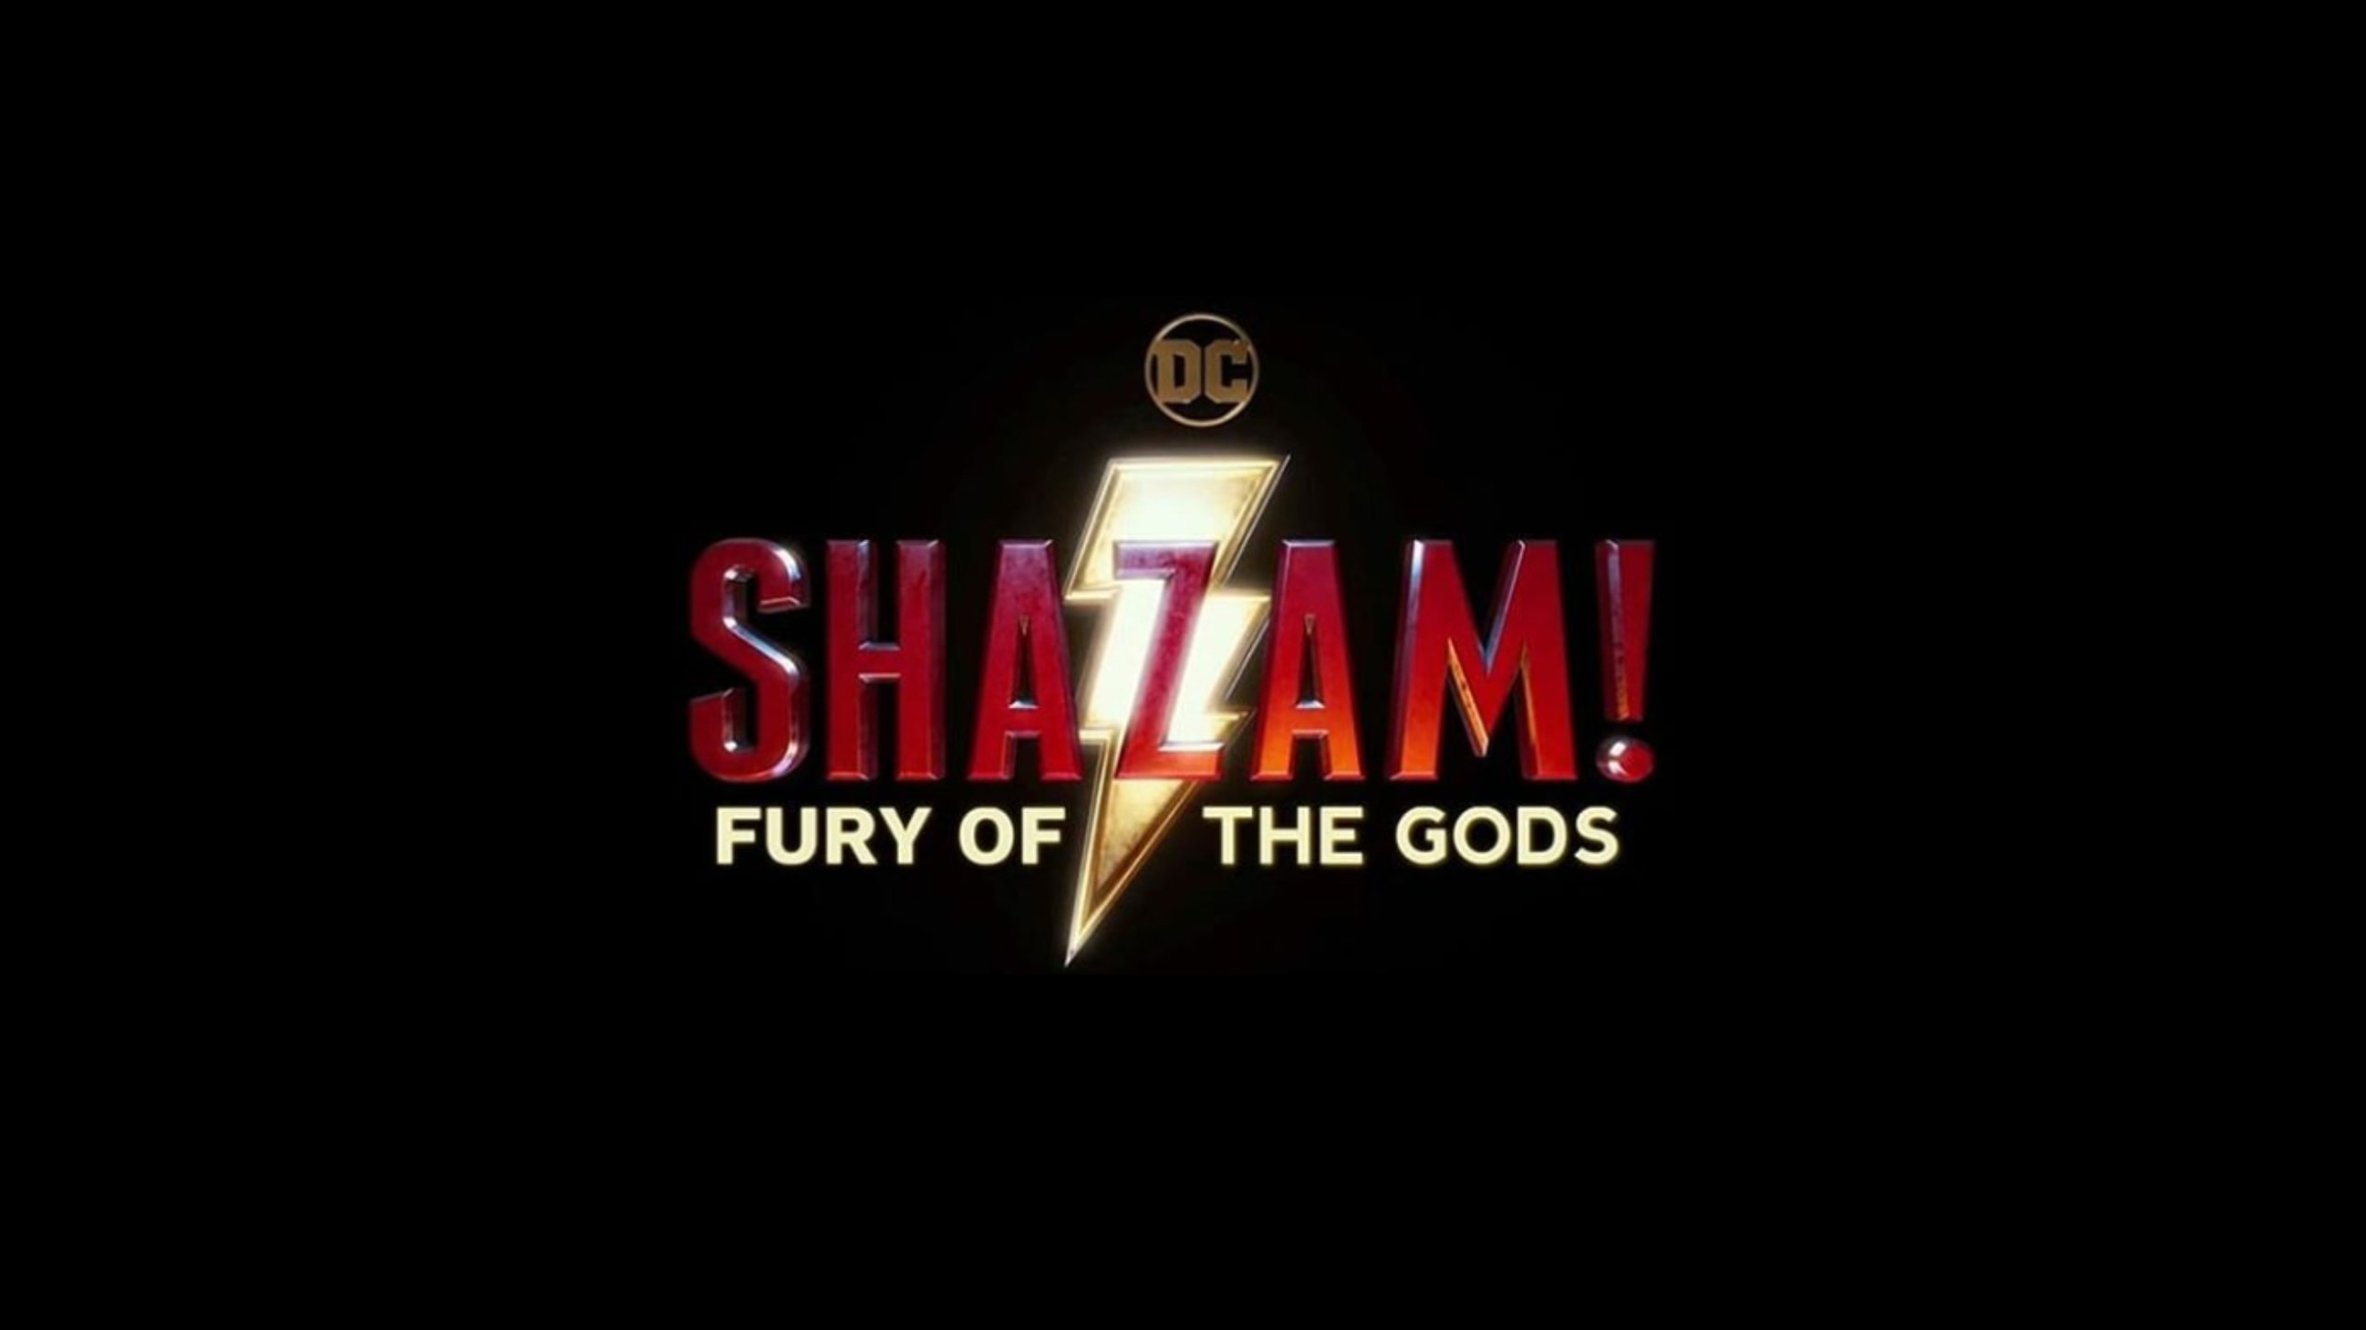 DC's SHAZAM 2 Casting Upscale Males & Females, ages 30-70 of French Descent Filming